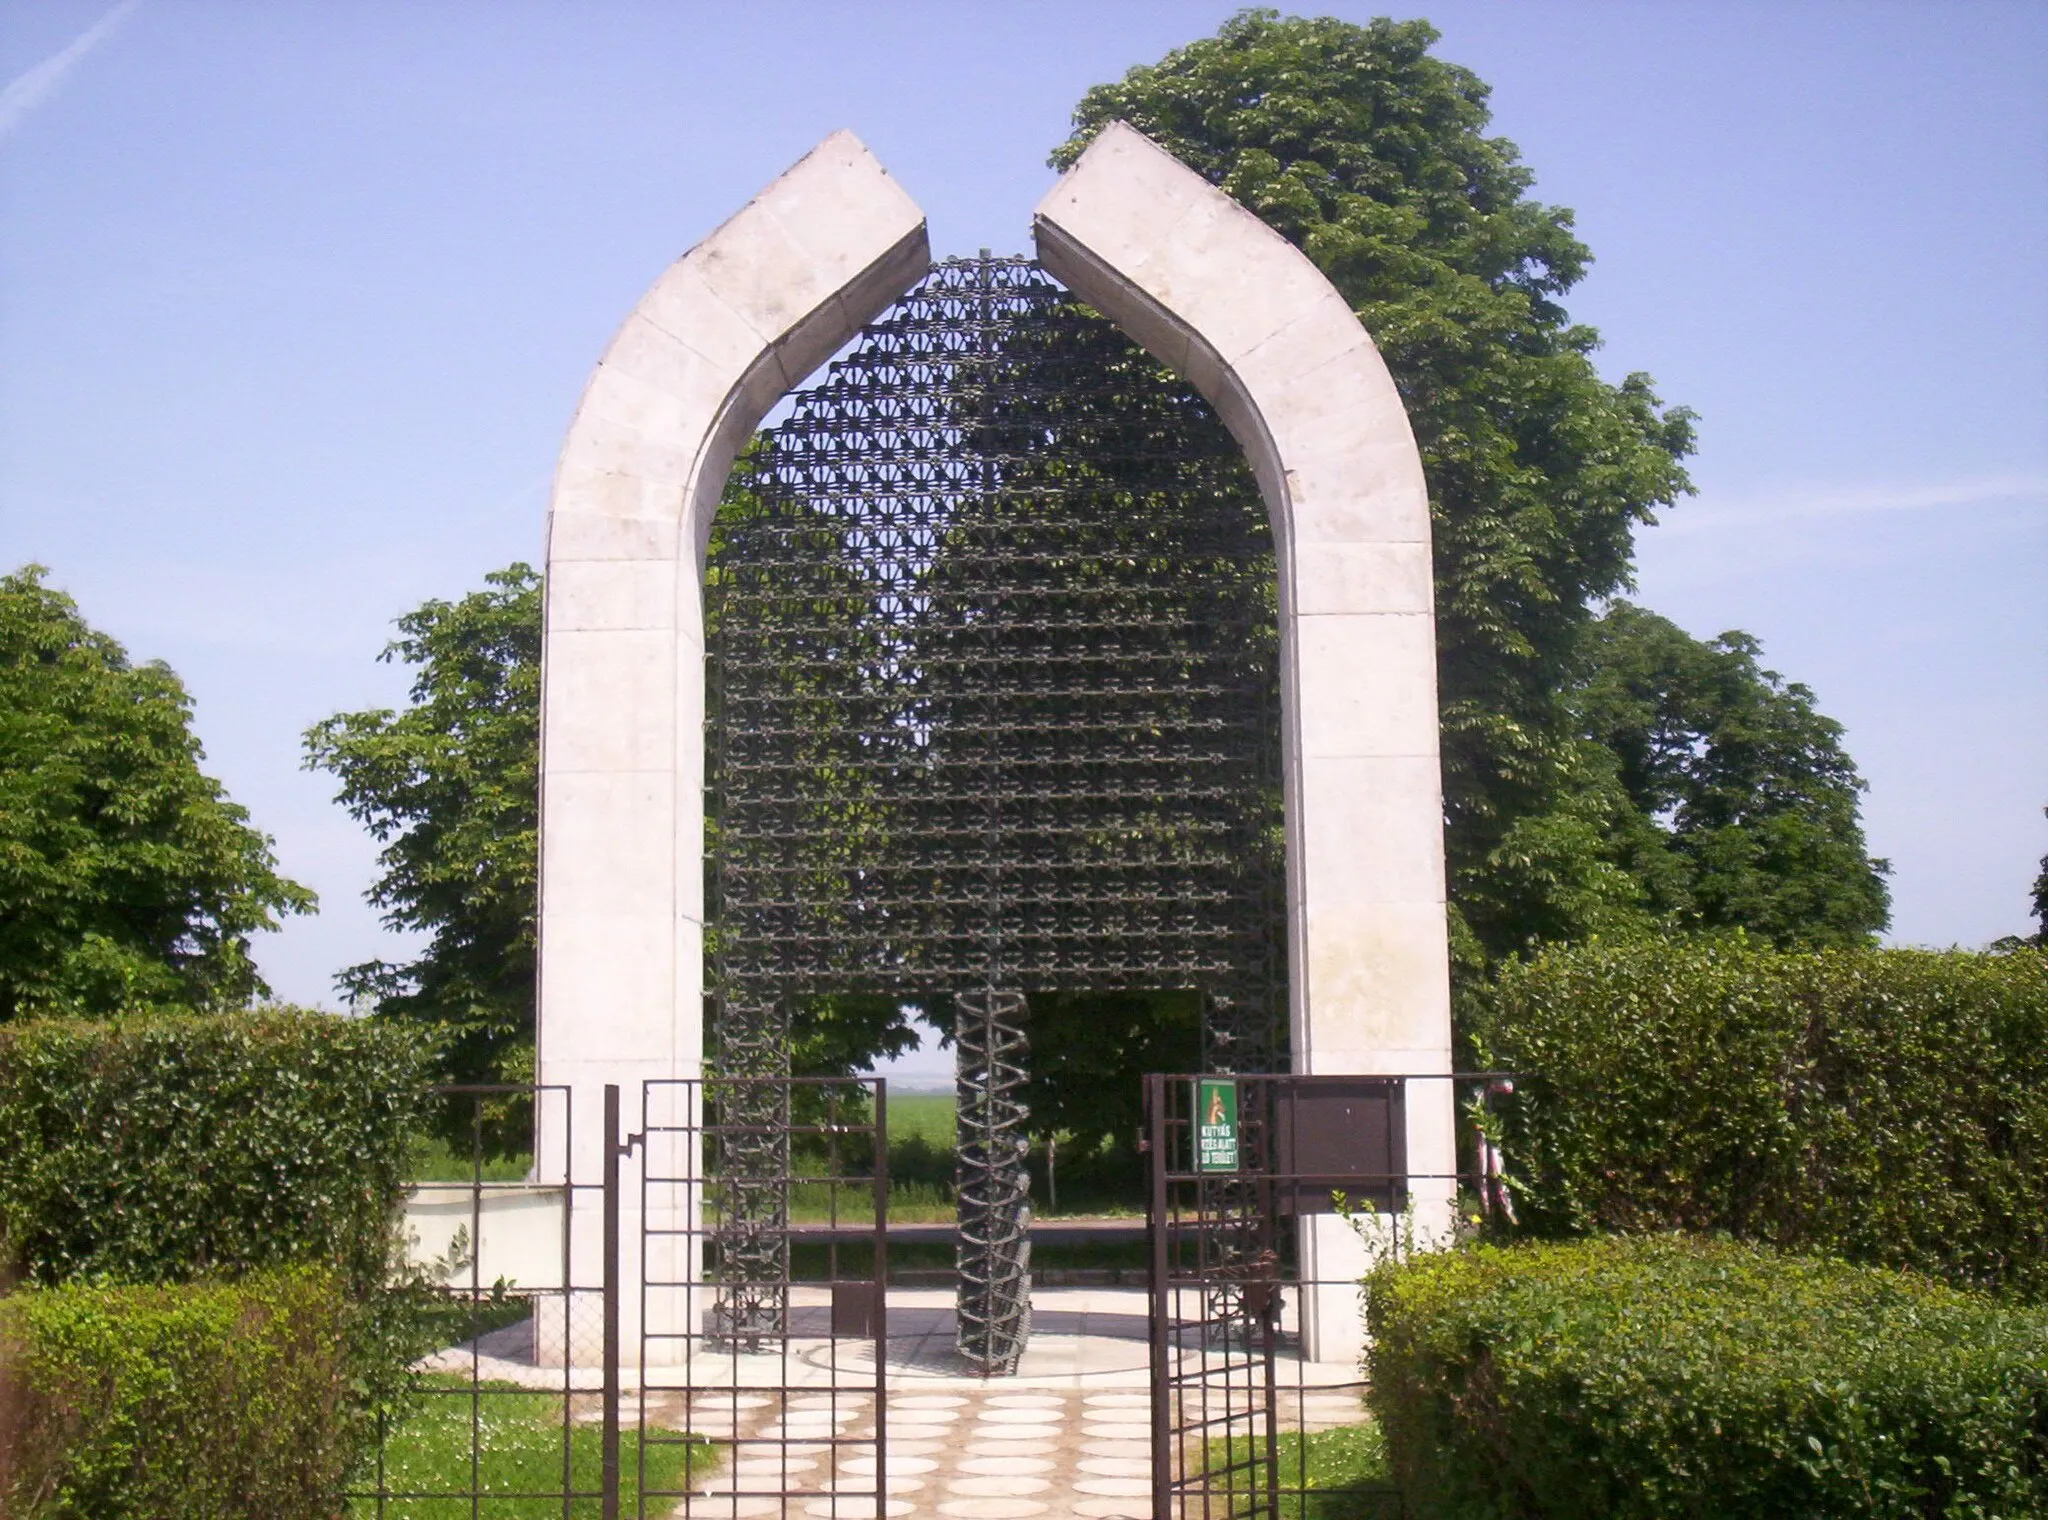 Photo showing: Mohács Historical Monument (Battle of Mohács, 1526) – photo taken by uploader User:Csanády in 2006.